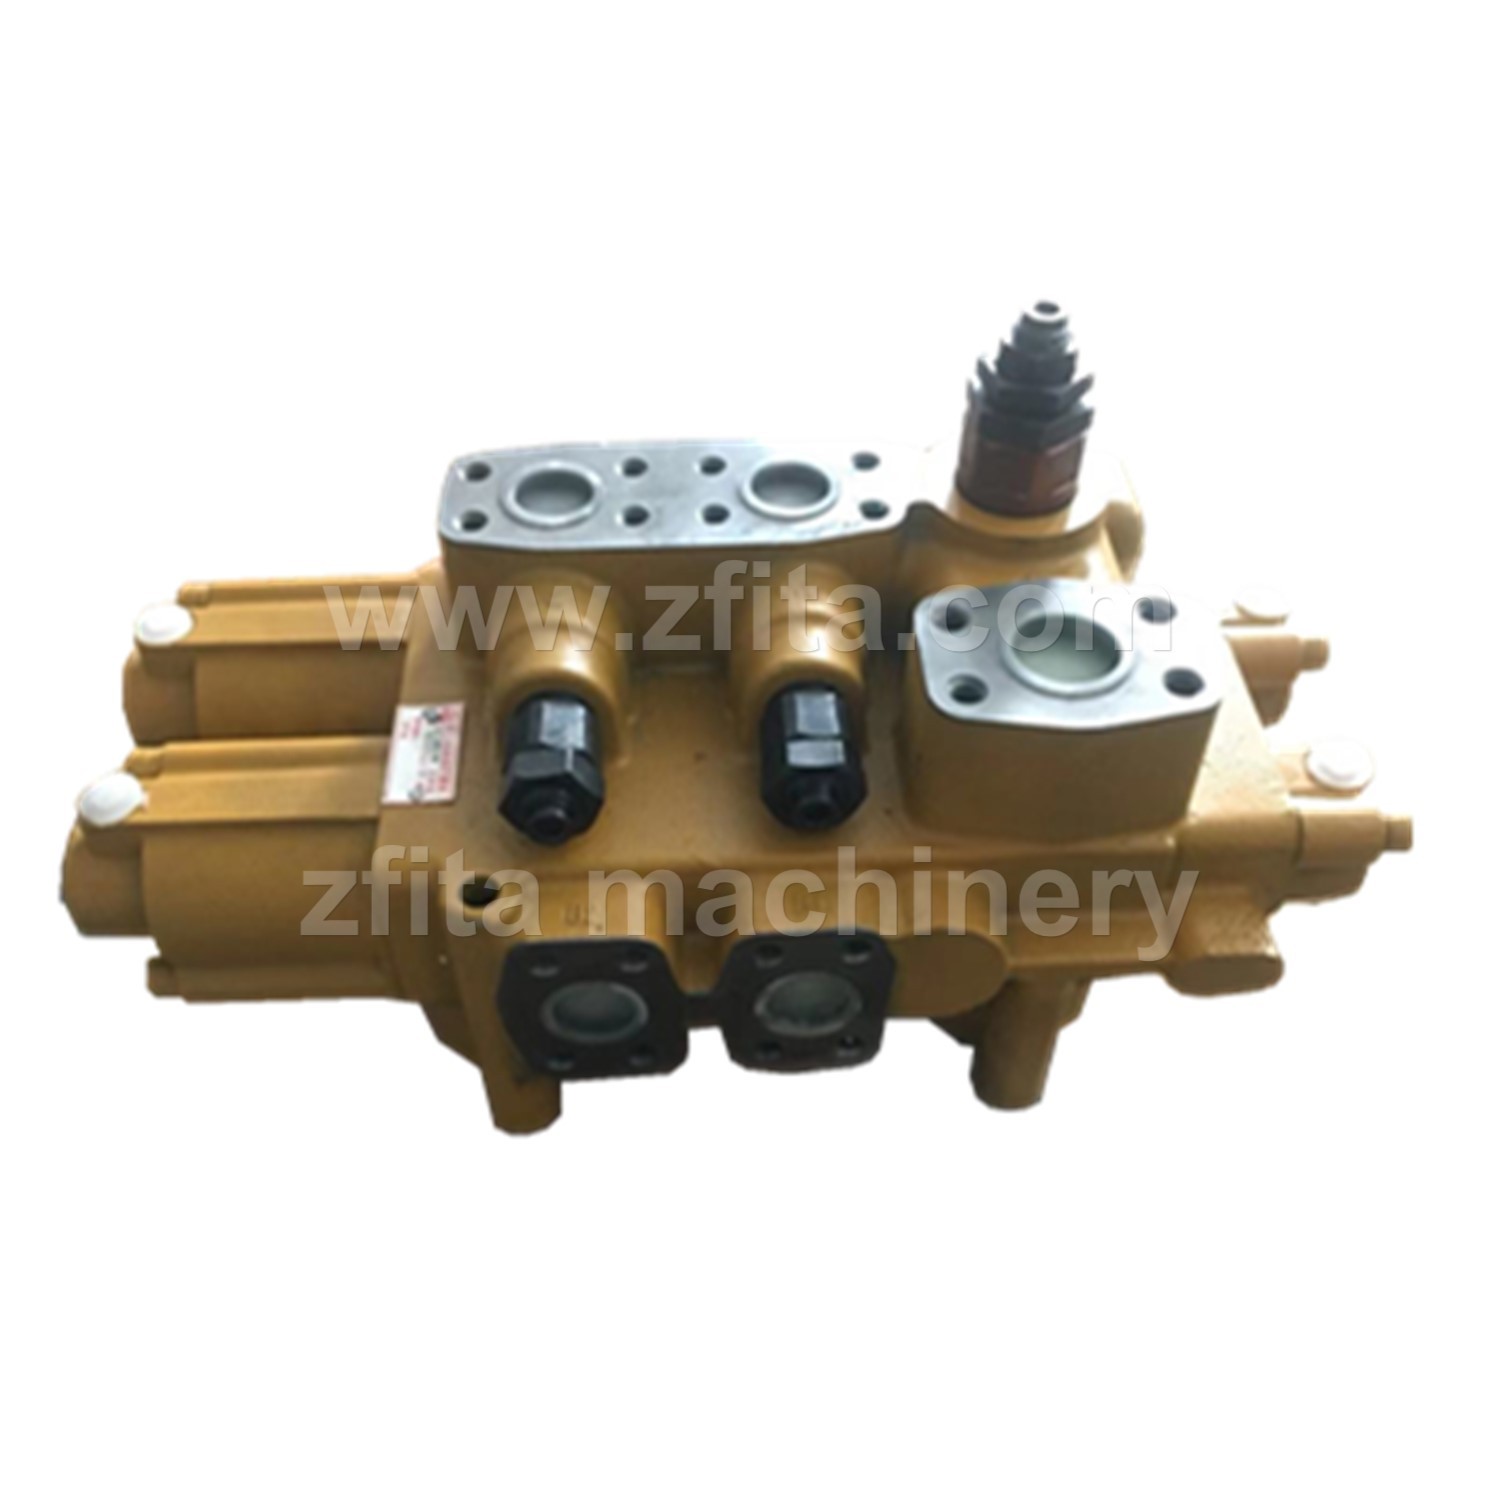 Changlin 957H wheel loader spare parts W-07-00083 D3II-YL20 hydraulic control valve